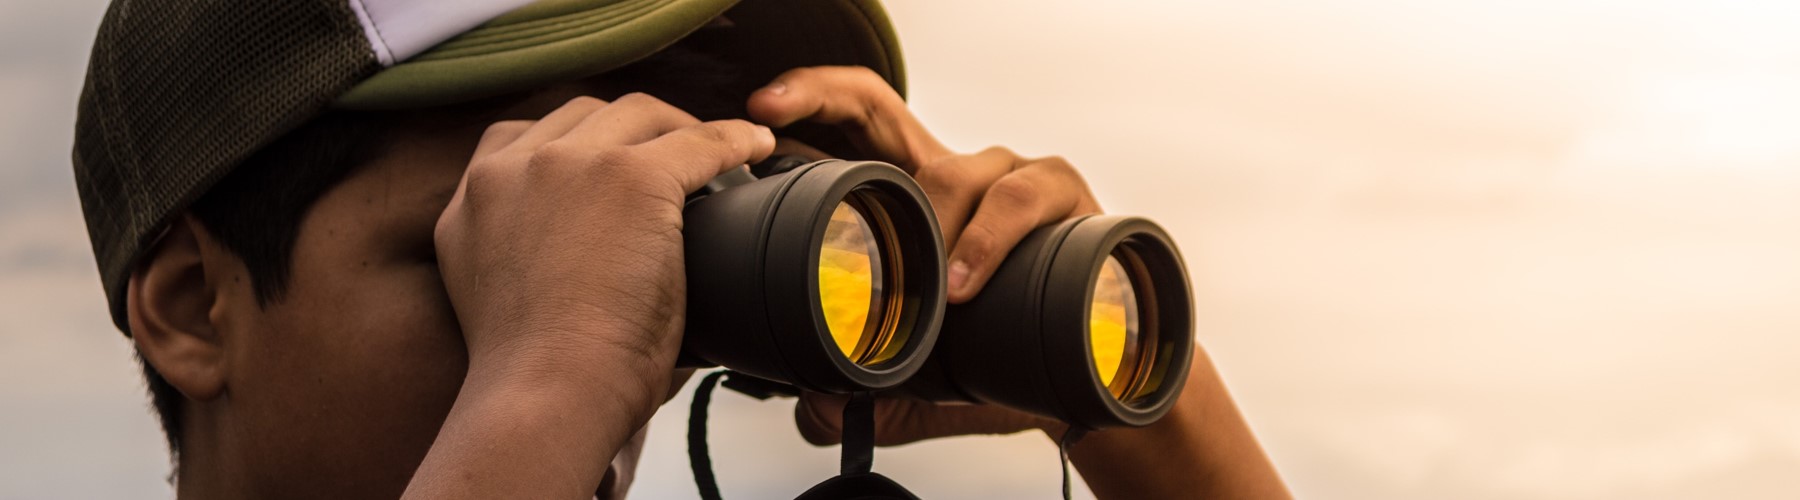 [Courtesy of pxhere](https://www.pexels.com/photo/man-looking-in-binoculars-during-sunset-802412/)